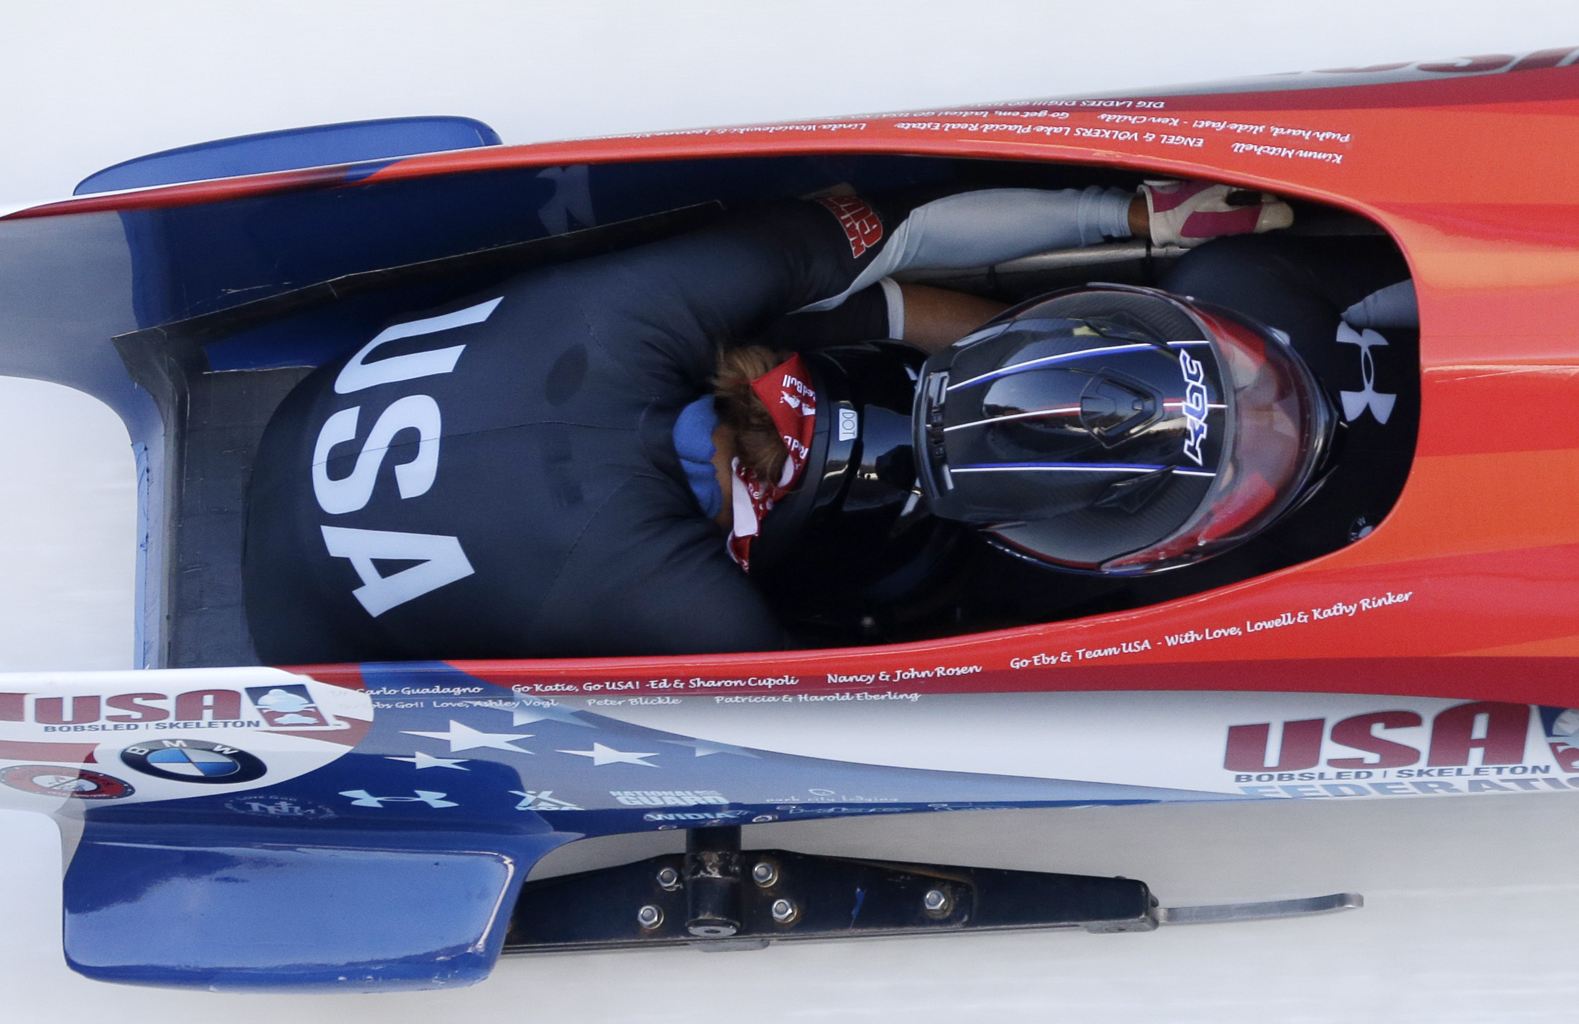 Lolo Jones and Jazmine Fenlator win silver medal at World Cup bobsled event